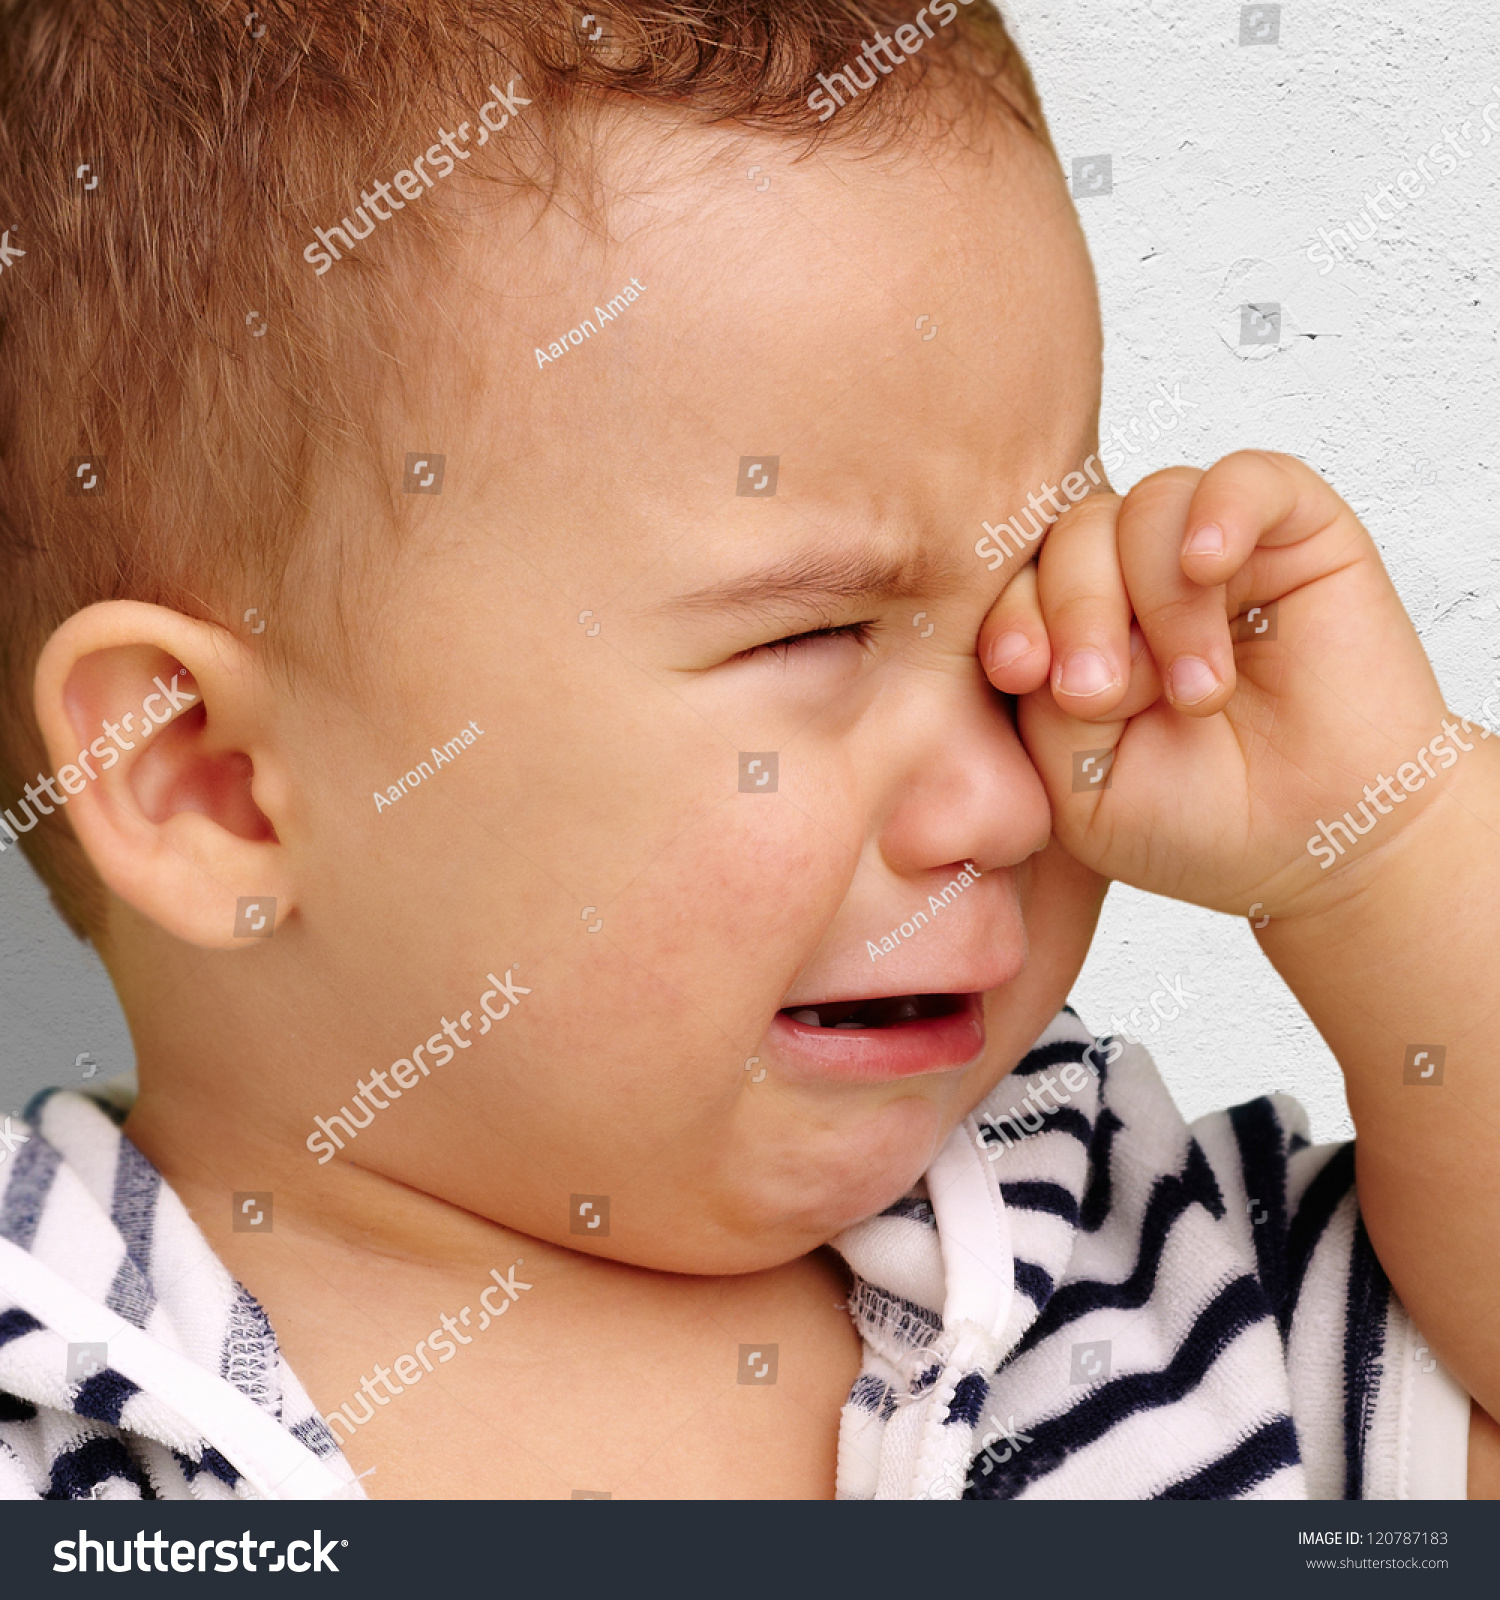 Portrait Of Baby Boy Crying Against A Grunge Background Stock Photo